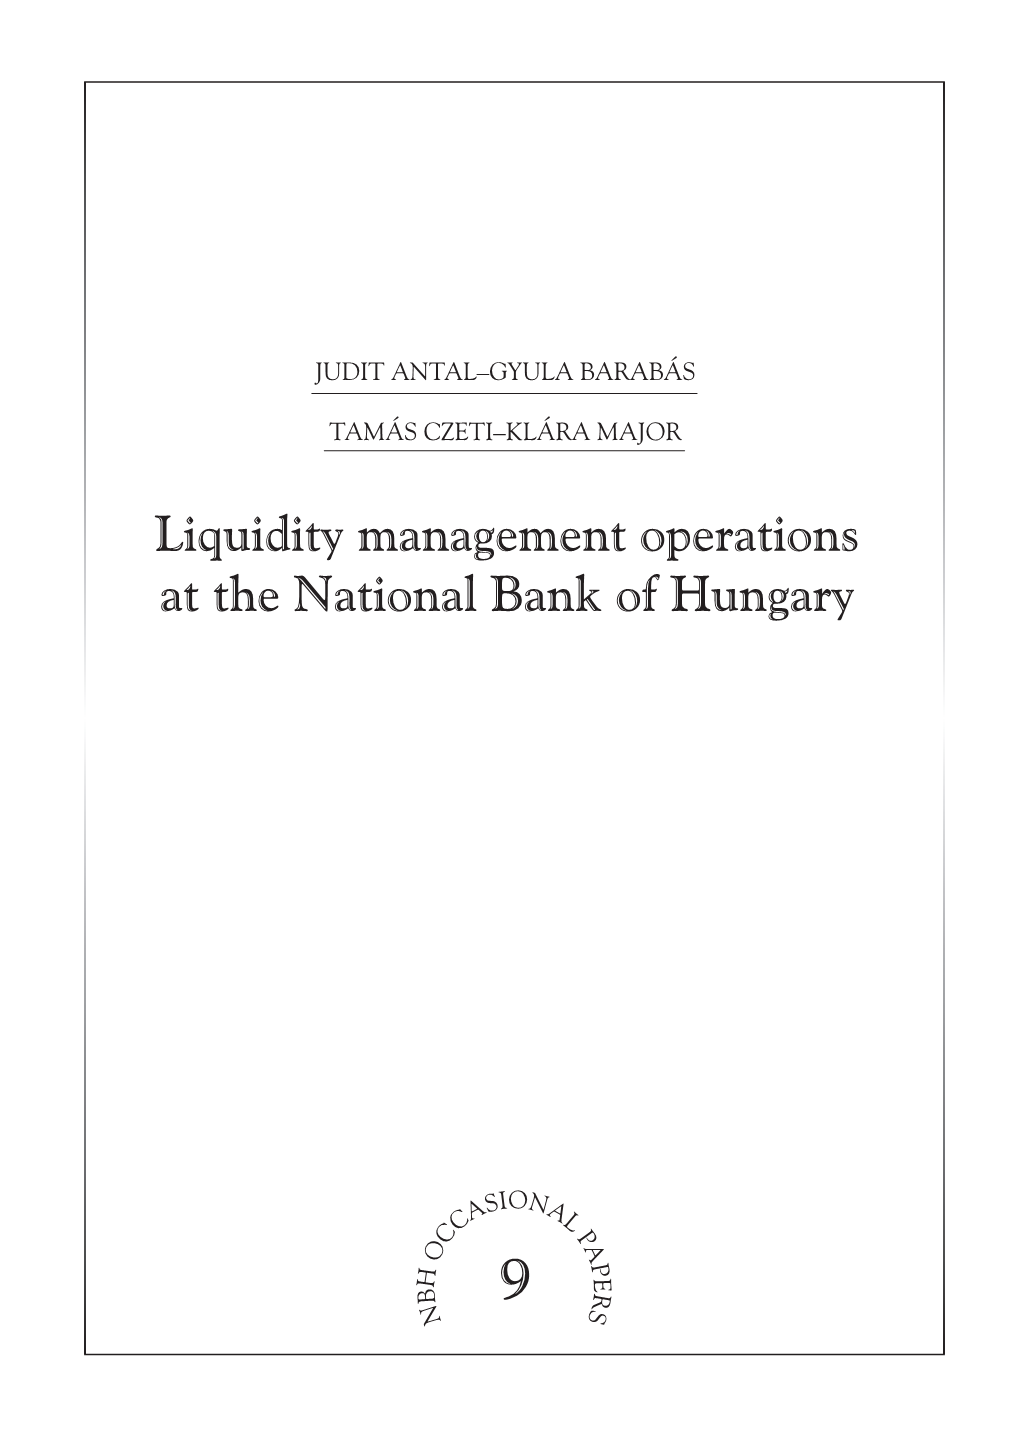 Liquidity Management Operations at the National Bank of Hungary